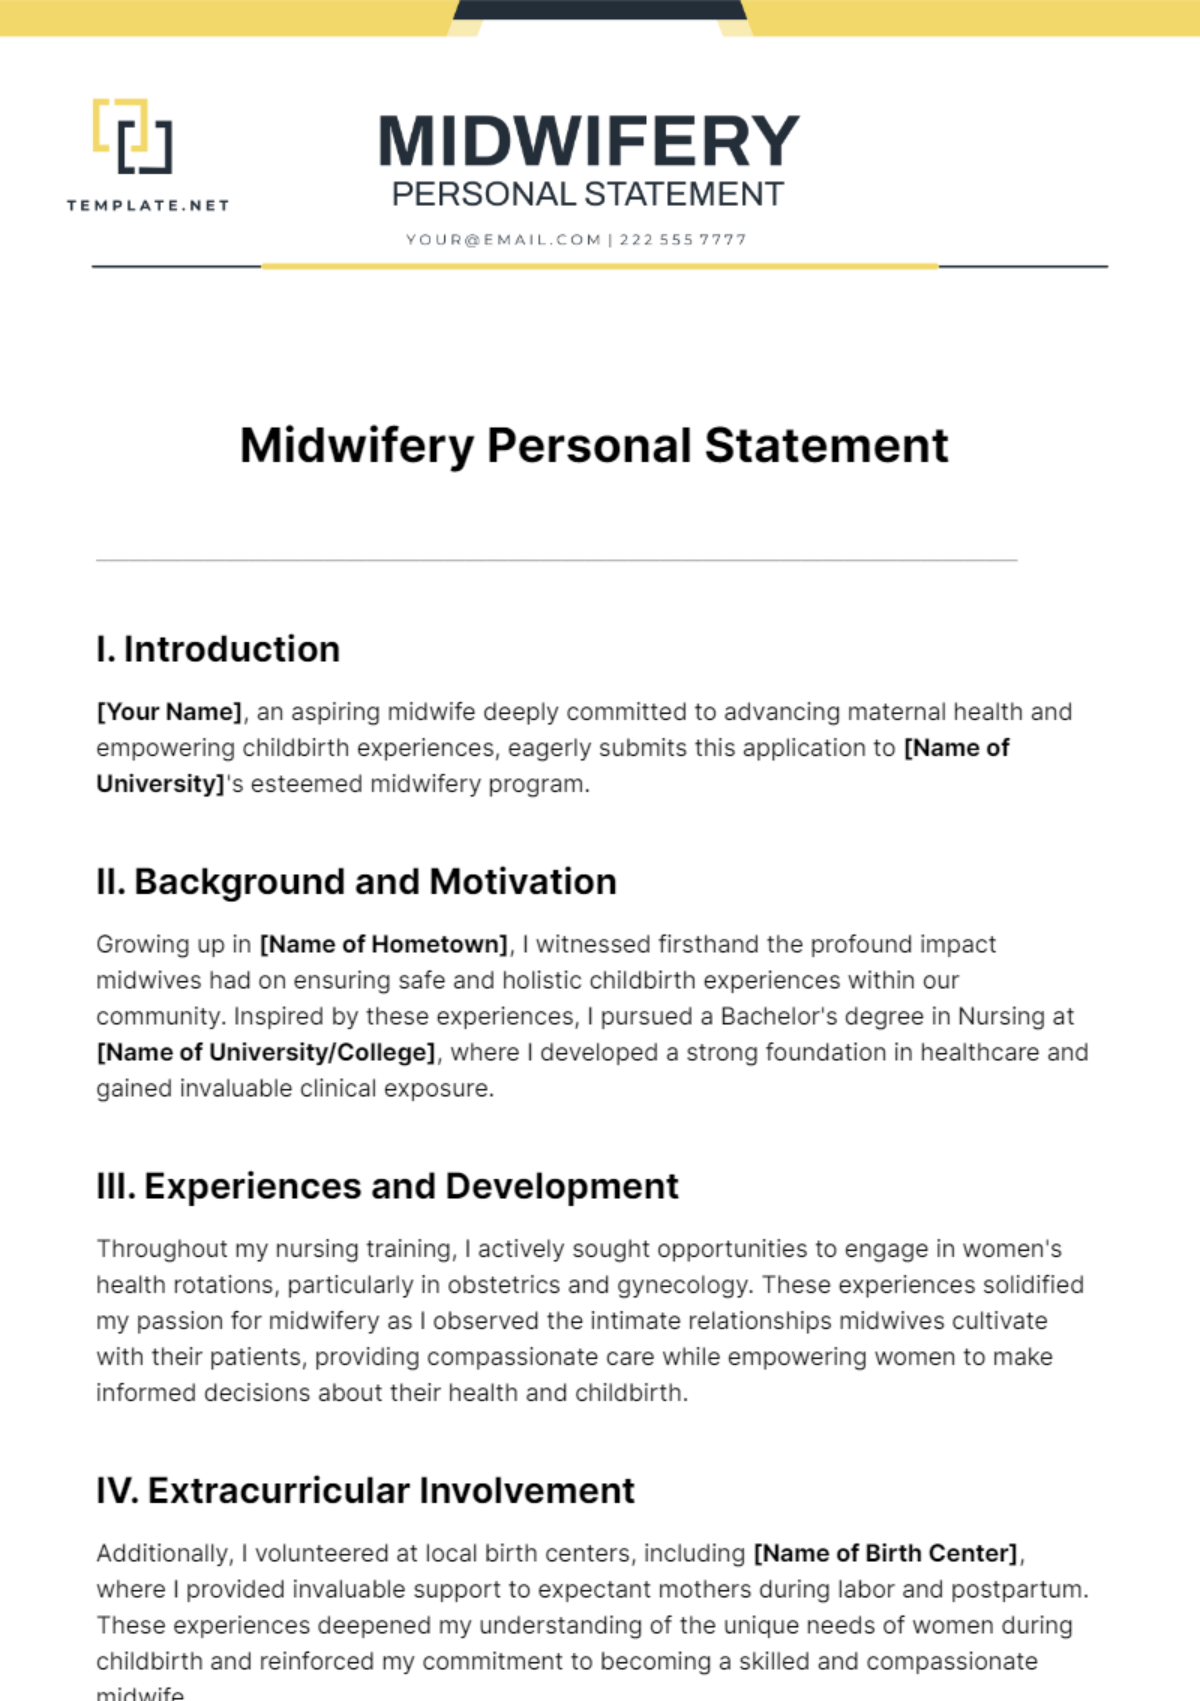 personal statement for midwifery jobs